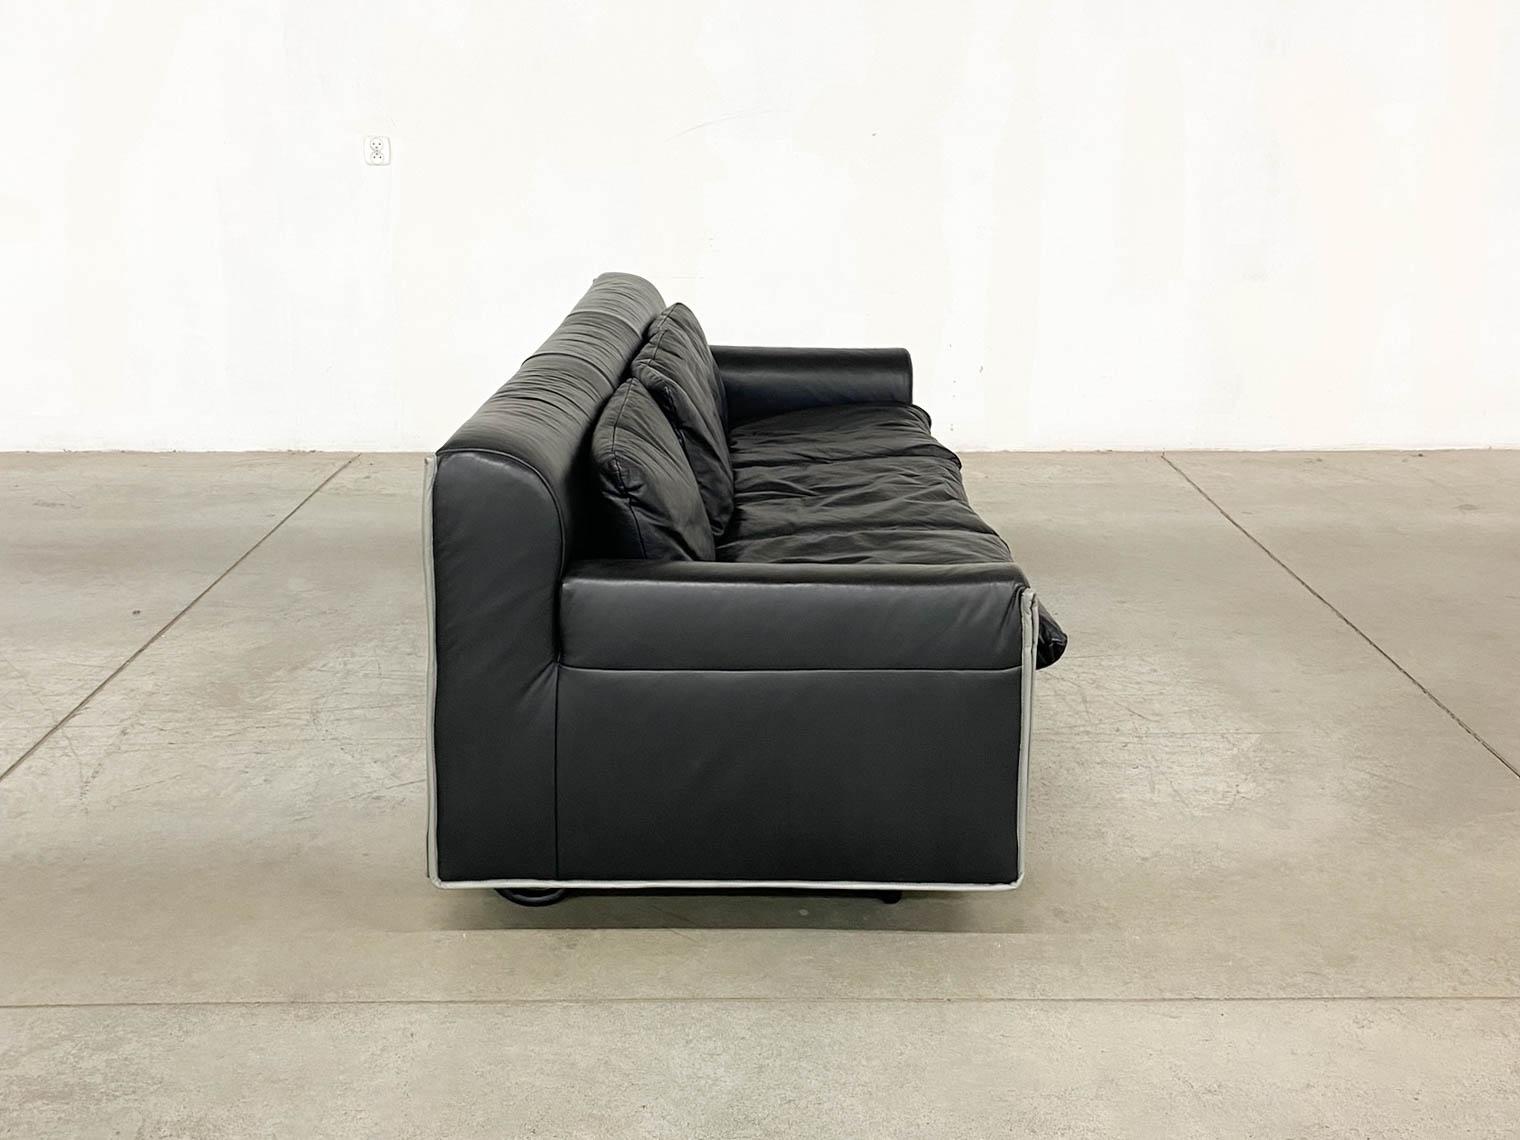 American Heli 3-Seater Leather Sofa by Otto Zapf for Knoll, 1980s For Sale